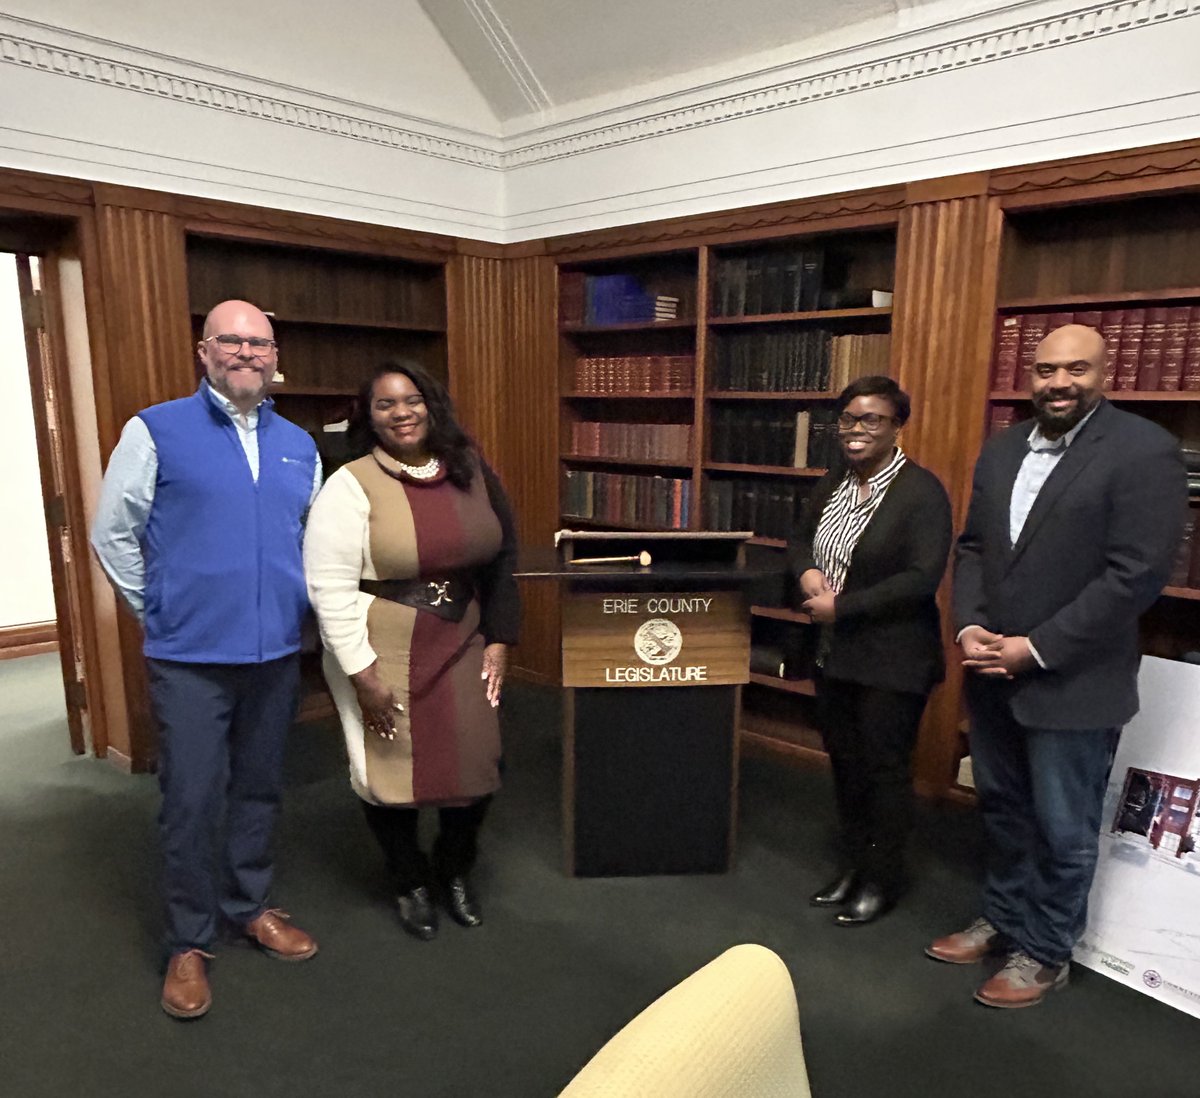 Kim Brown of Community Access Services, and Richard Ridenour of Evergreen, along with Art Hall from Hallmark Planning & Development, met with Erie County Legislator Chairwoman April Baskin to present the CAS Ken-Bailey Project. We’re thankful for Chairwoman Baskin’s support!